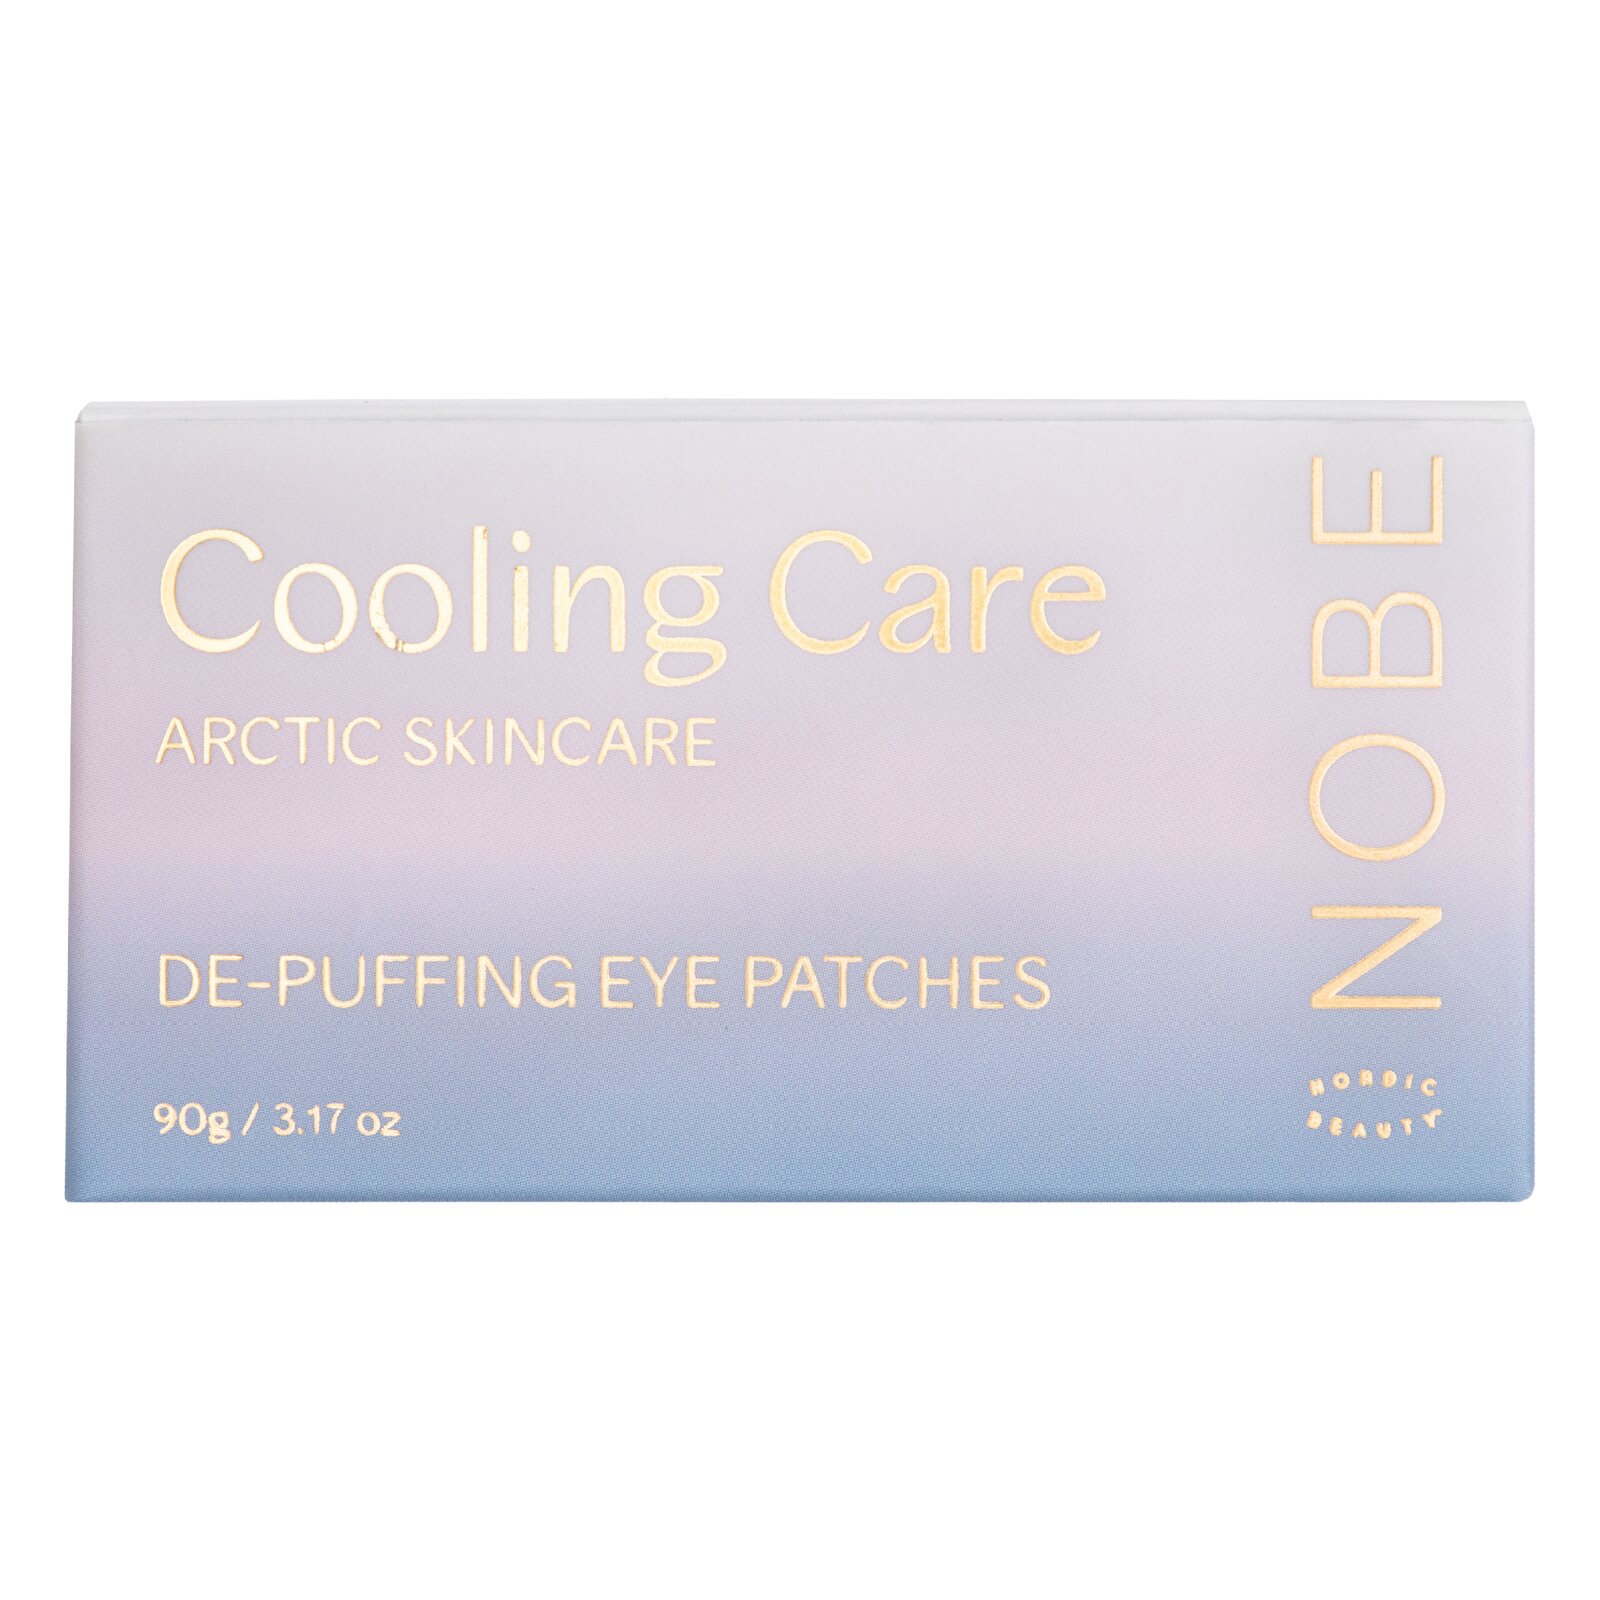 NOBE Cooling Care De-Puffing Eye Patches hydrogeelinaamiot